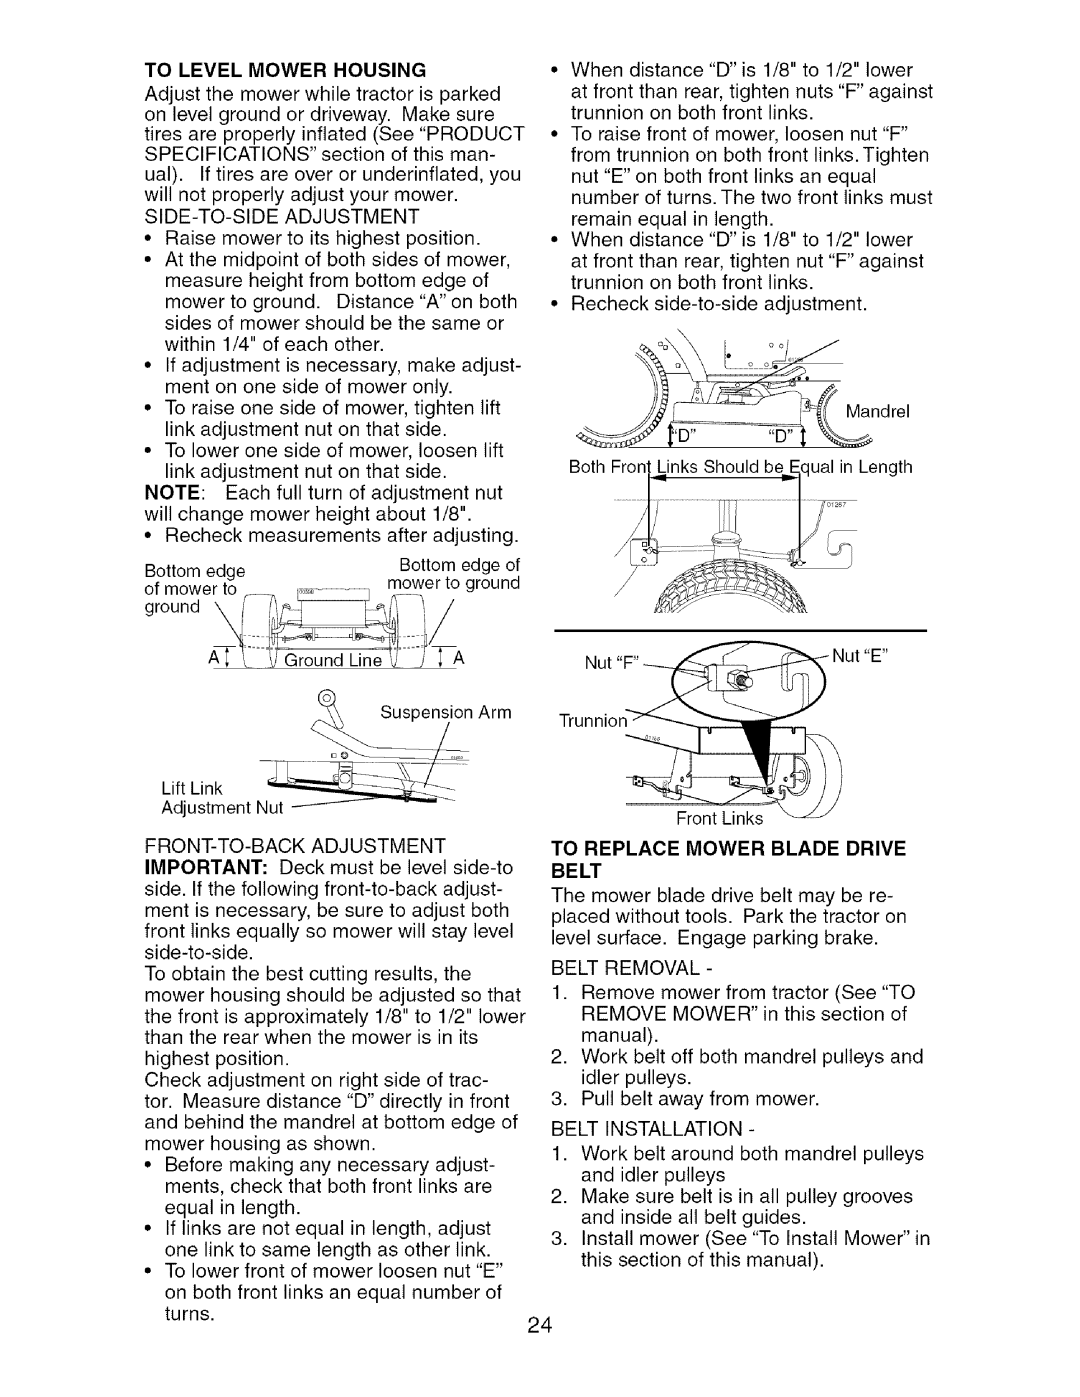 Craftsman 917.275764 owner manual To Level Mower Housing, To Replace Mower Blade Drive Belt 